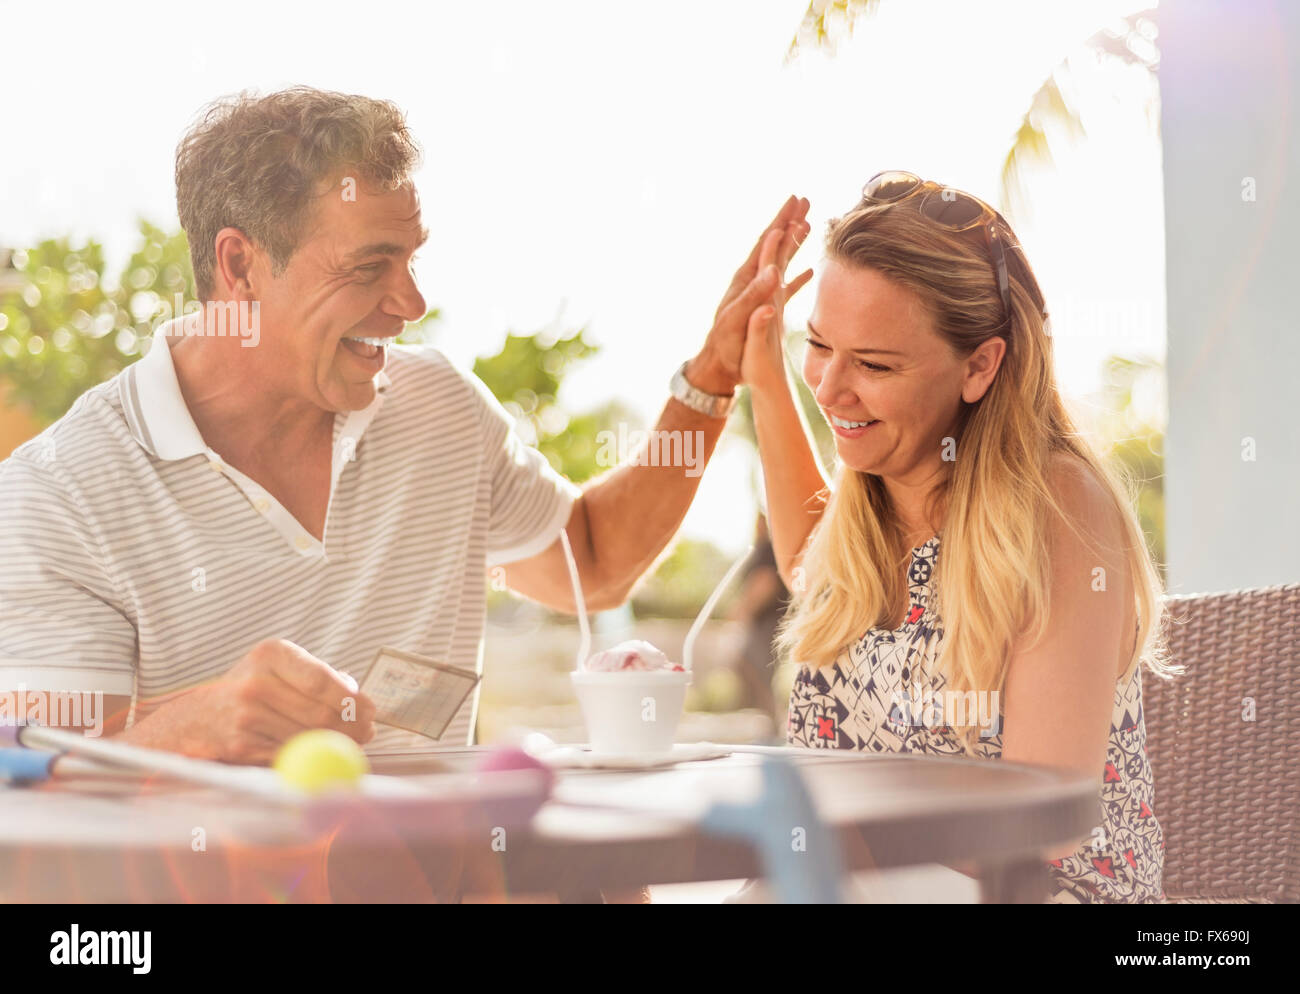 Caucasian couple high-fiving at outdoor table Stock Photo